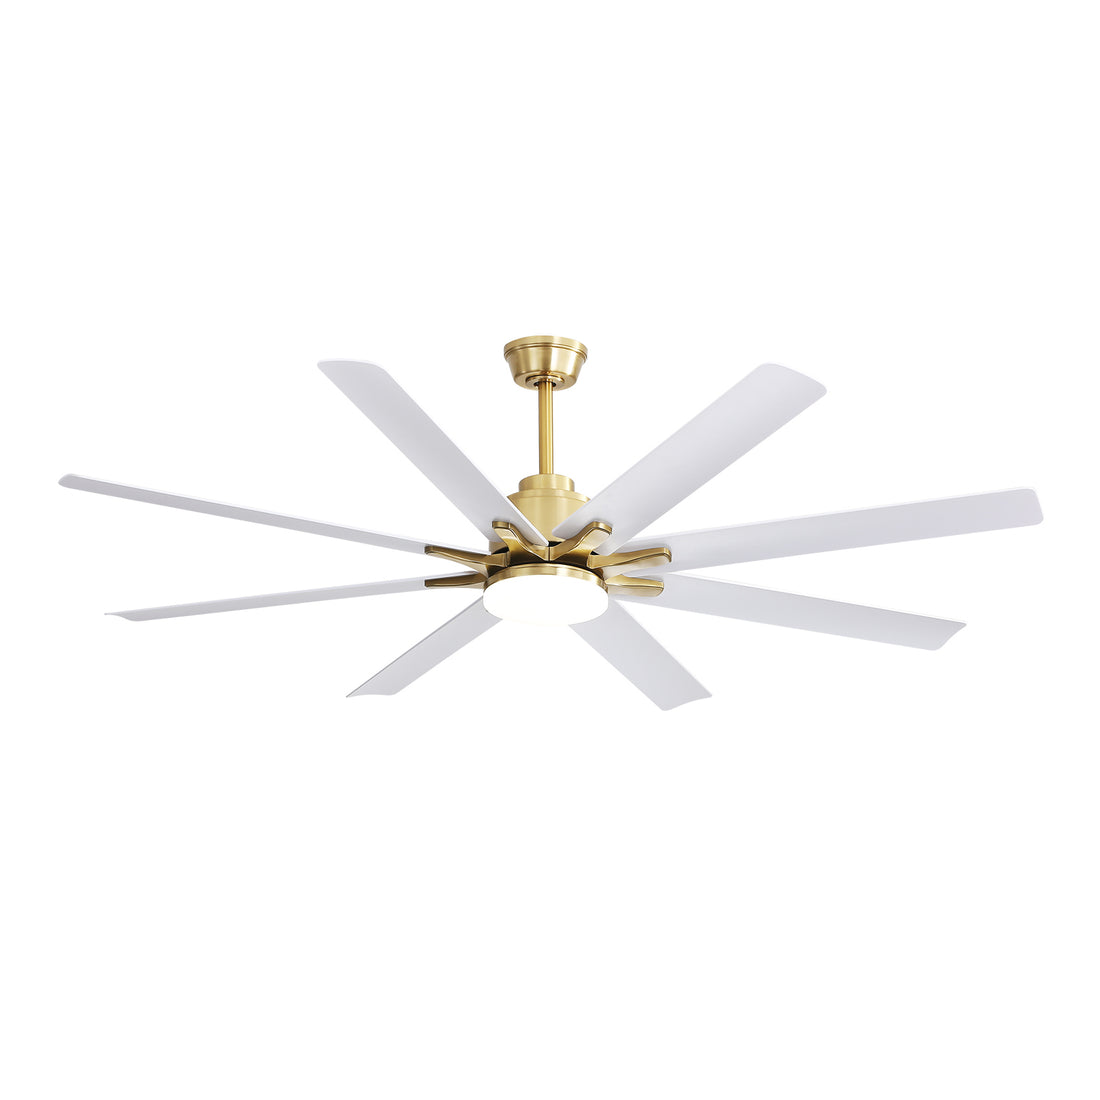 66 Inch Low Profile ABS Ceiling Fan with Dimmable brushed nickel-abs